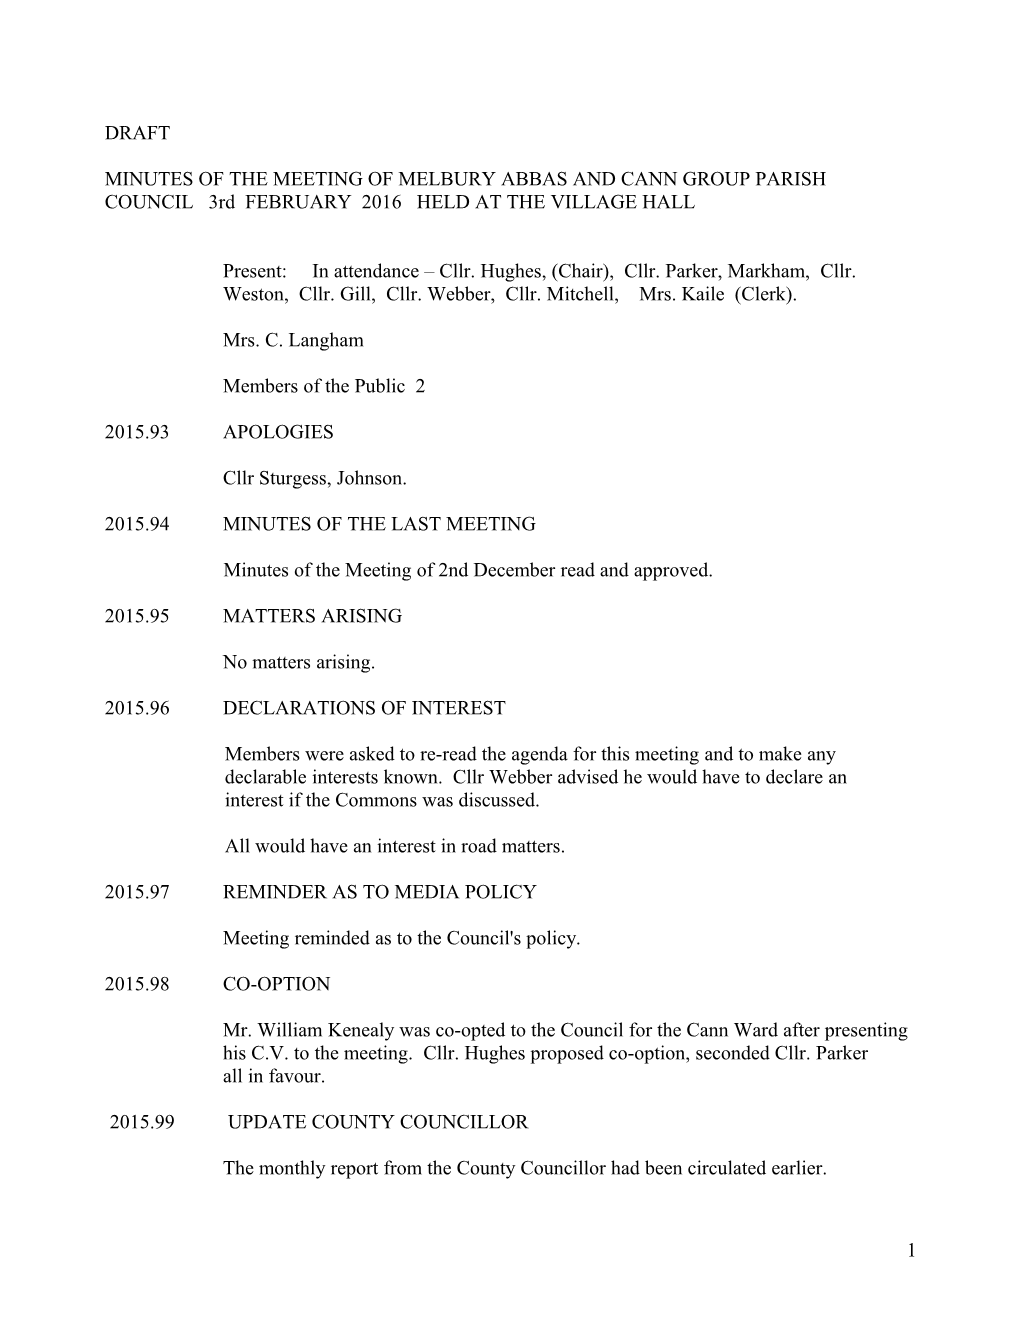 MINUTES of the MEETING of MELBURY ABBAS and CANN GROUP PARISH COUNCIL HELD on 14Th FEBRUARY 2006